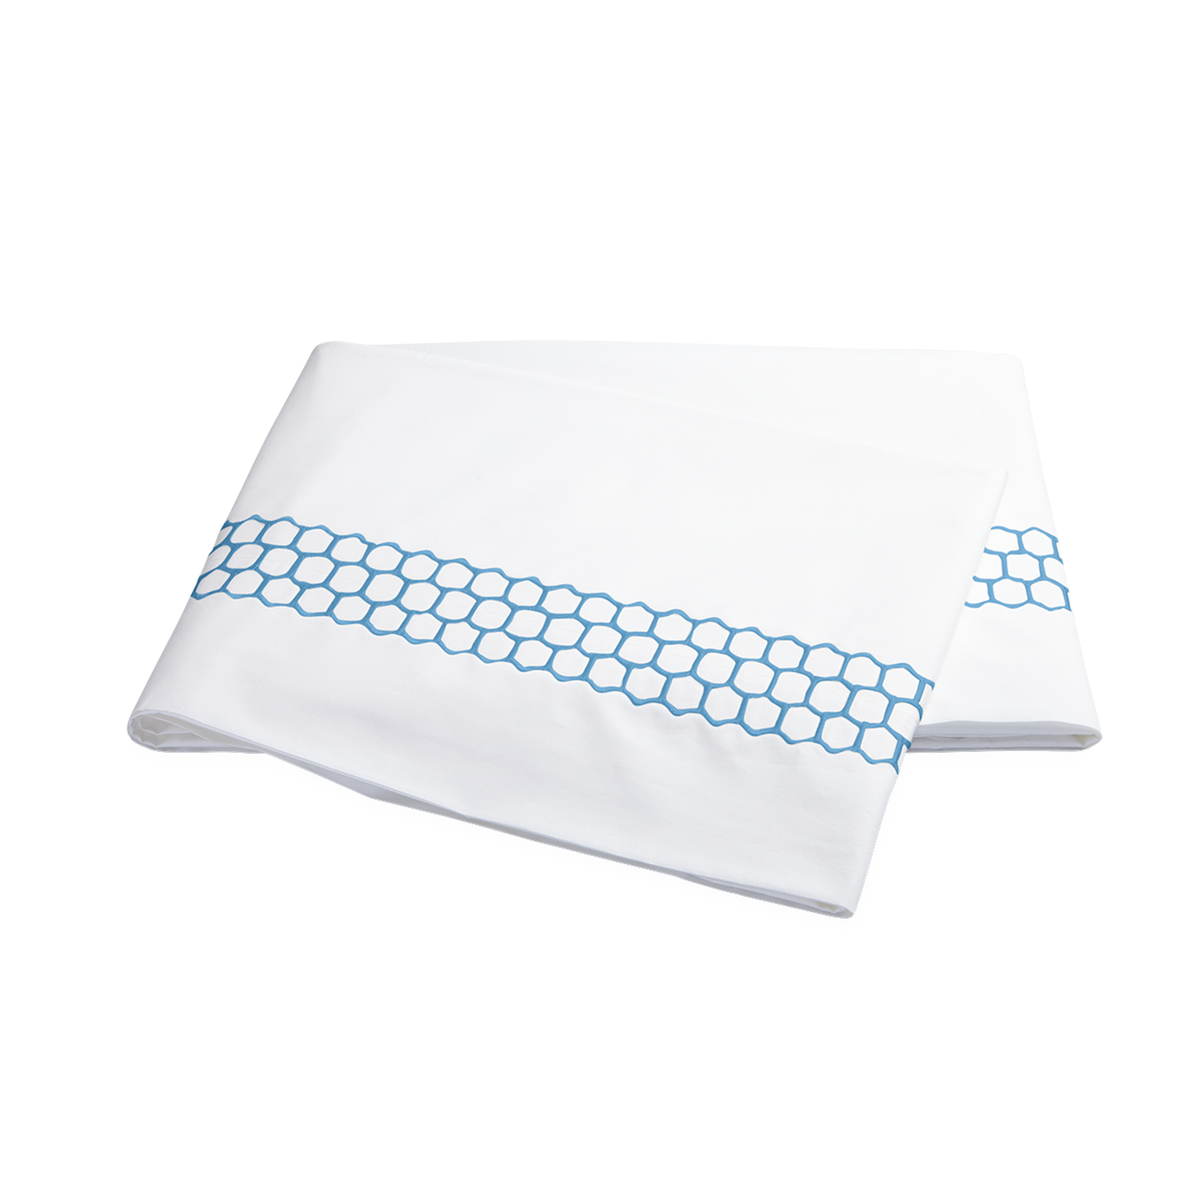 Clear Image of Matouk Liana Bedding Flat Sheet in Ocean Color